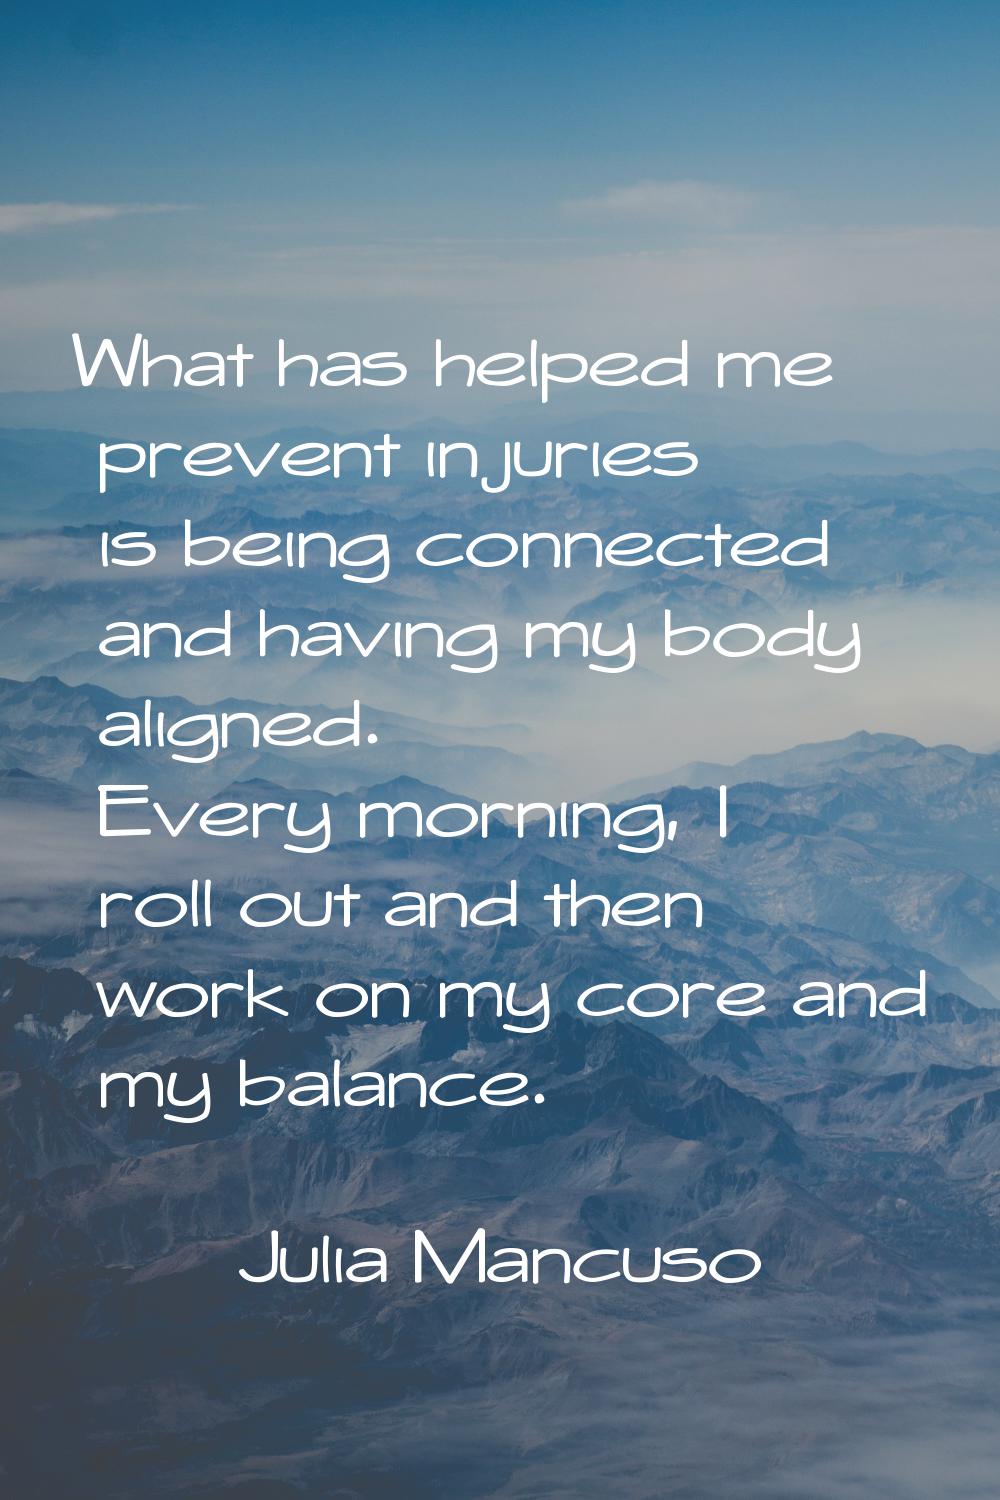 What has helped me prevent injuries is being connected and having my body aligned. Every morning, I